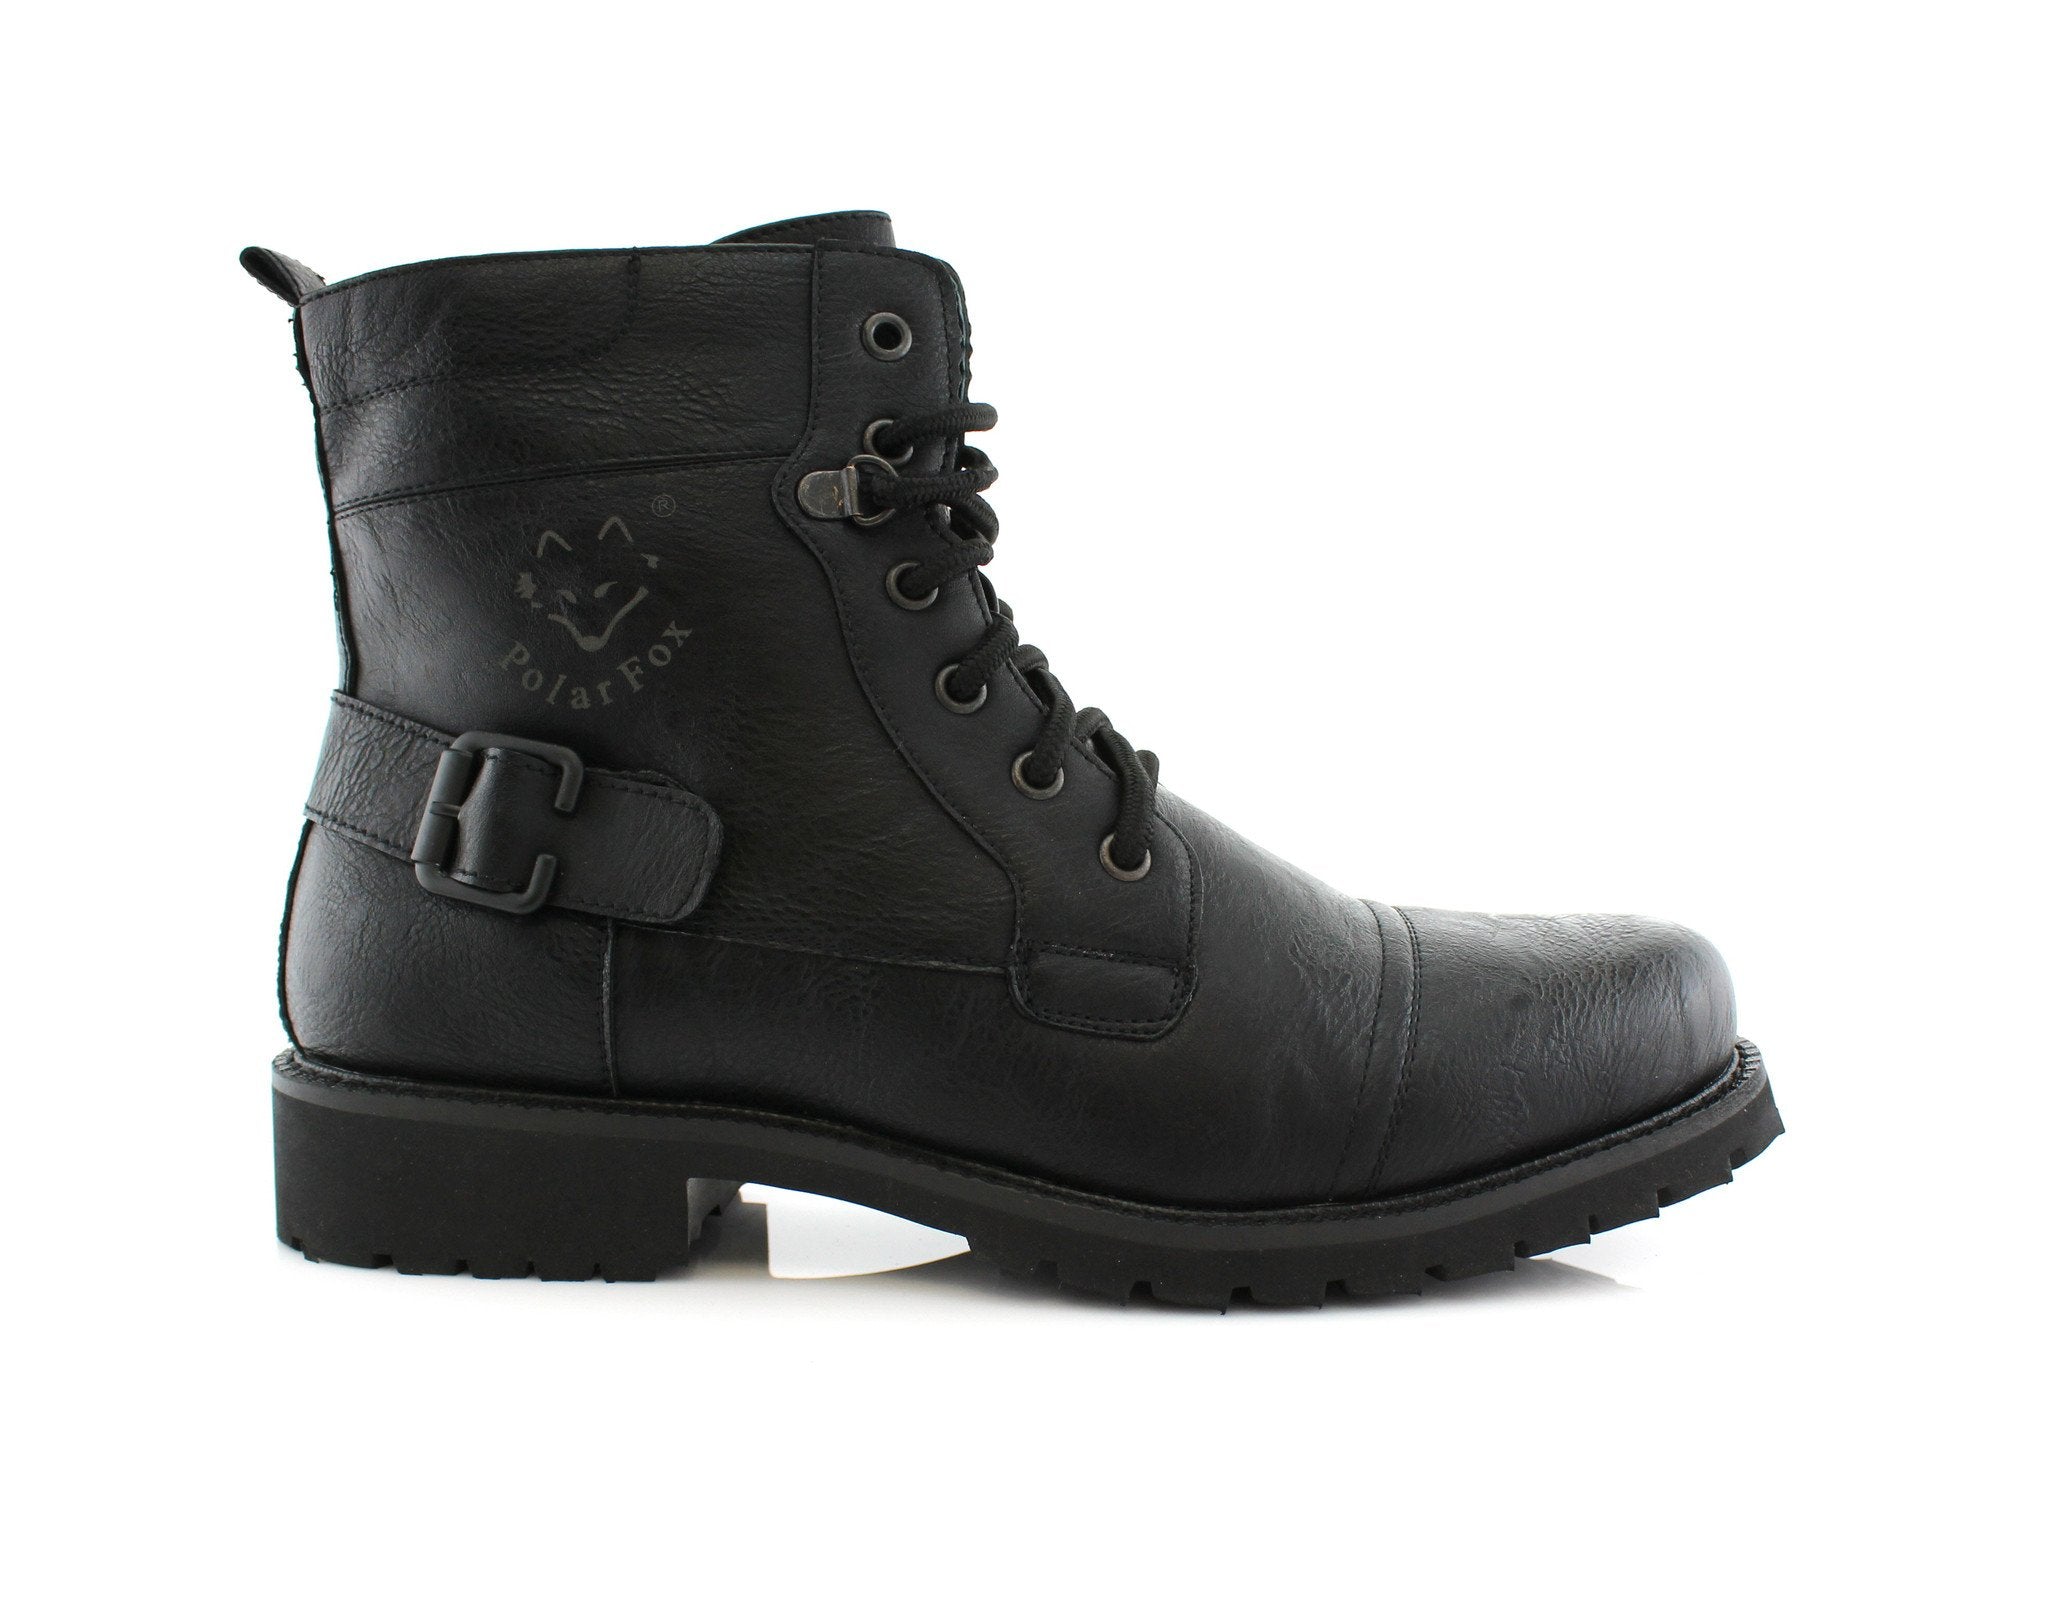 Rugged Inner Boots | Fabian by Polar Fox | Conal Footwear | Outer Side Angle View